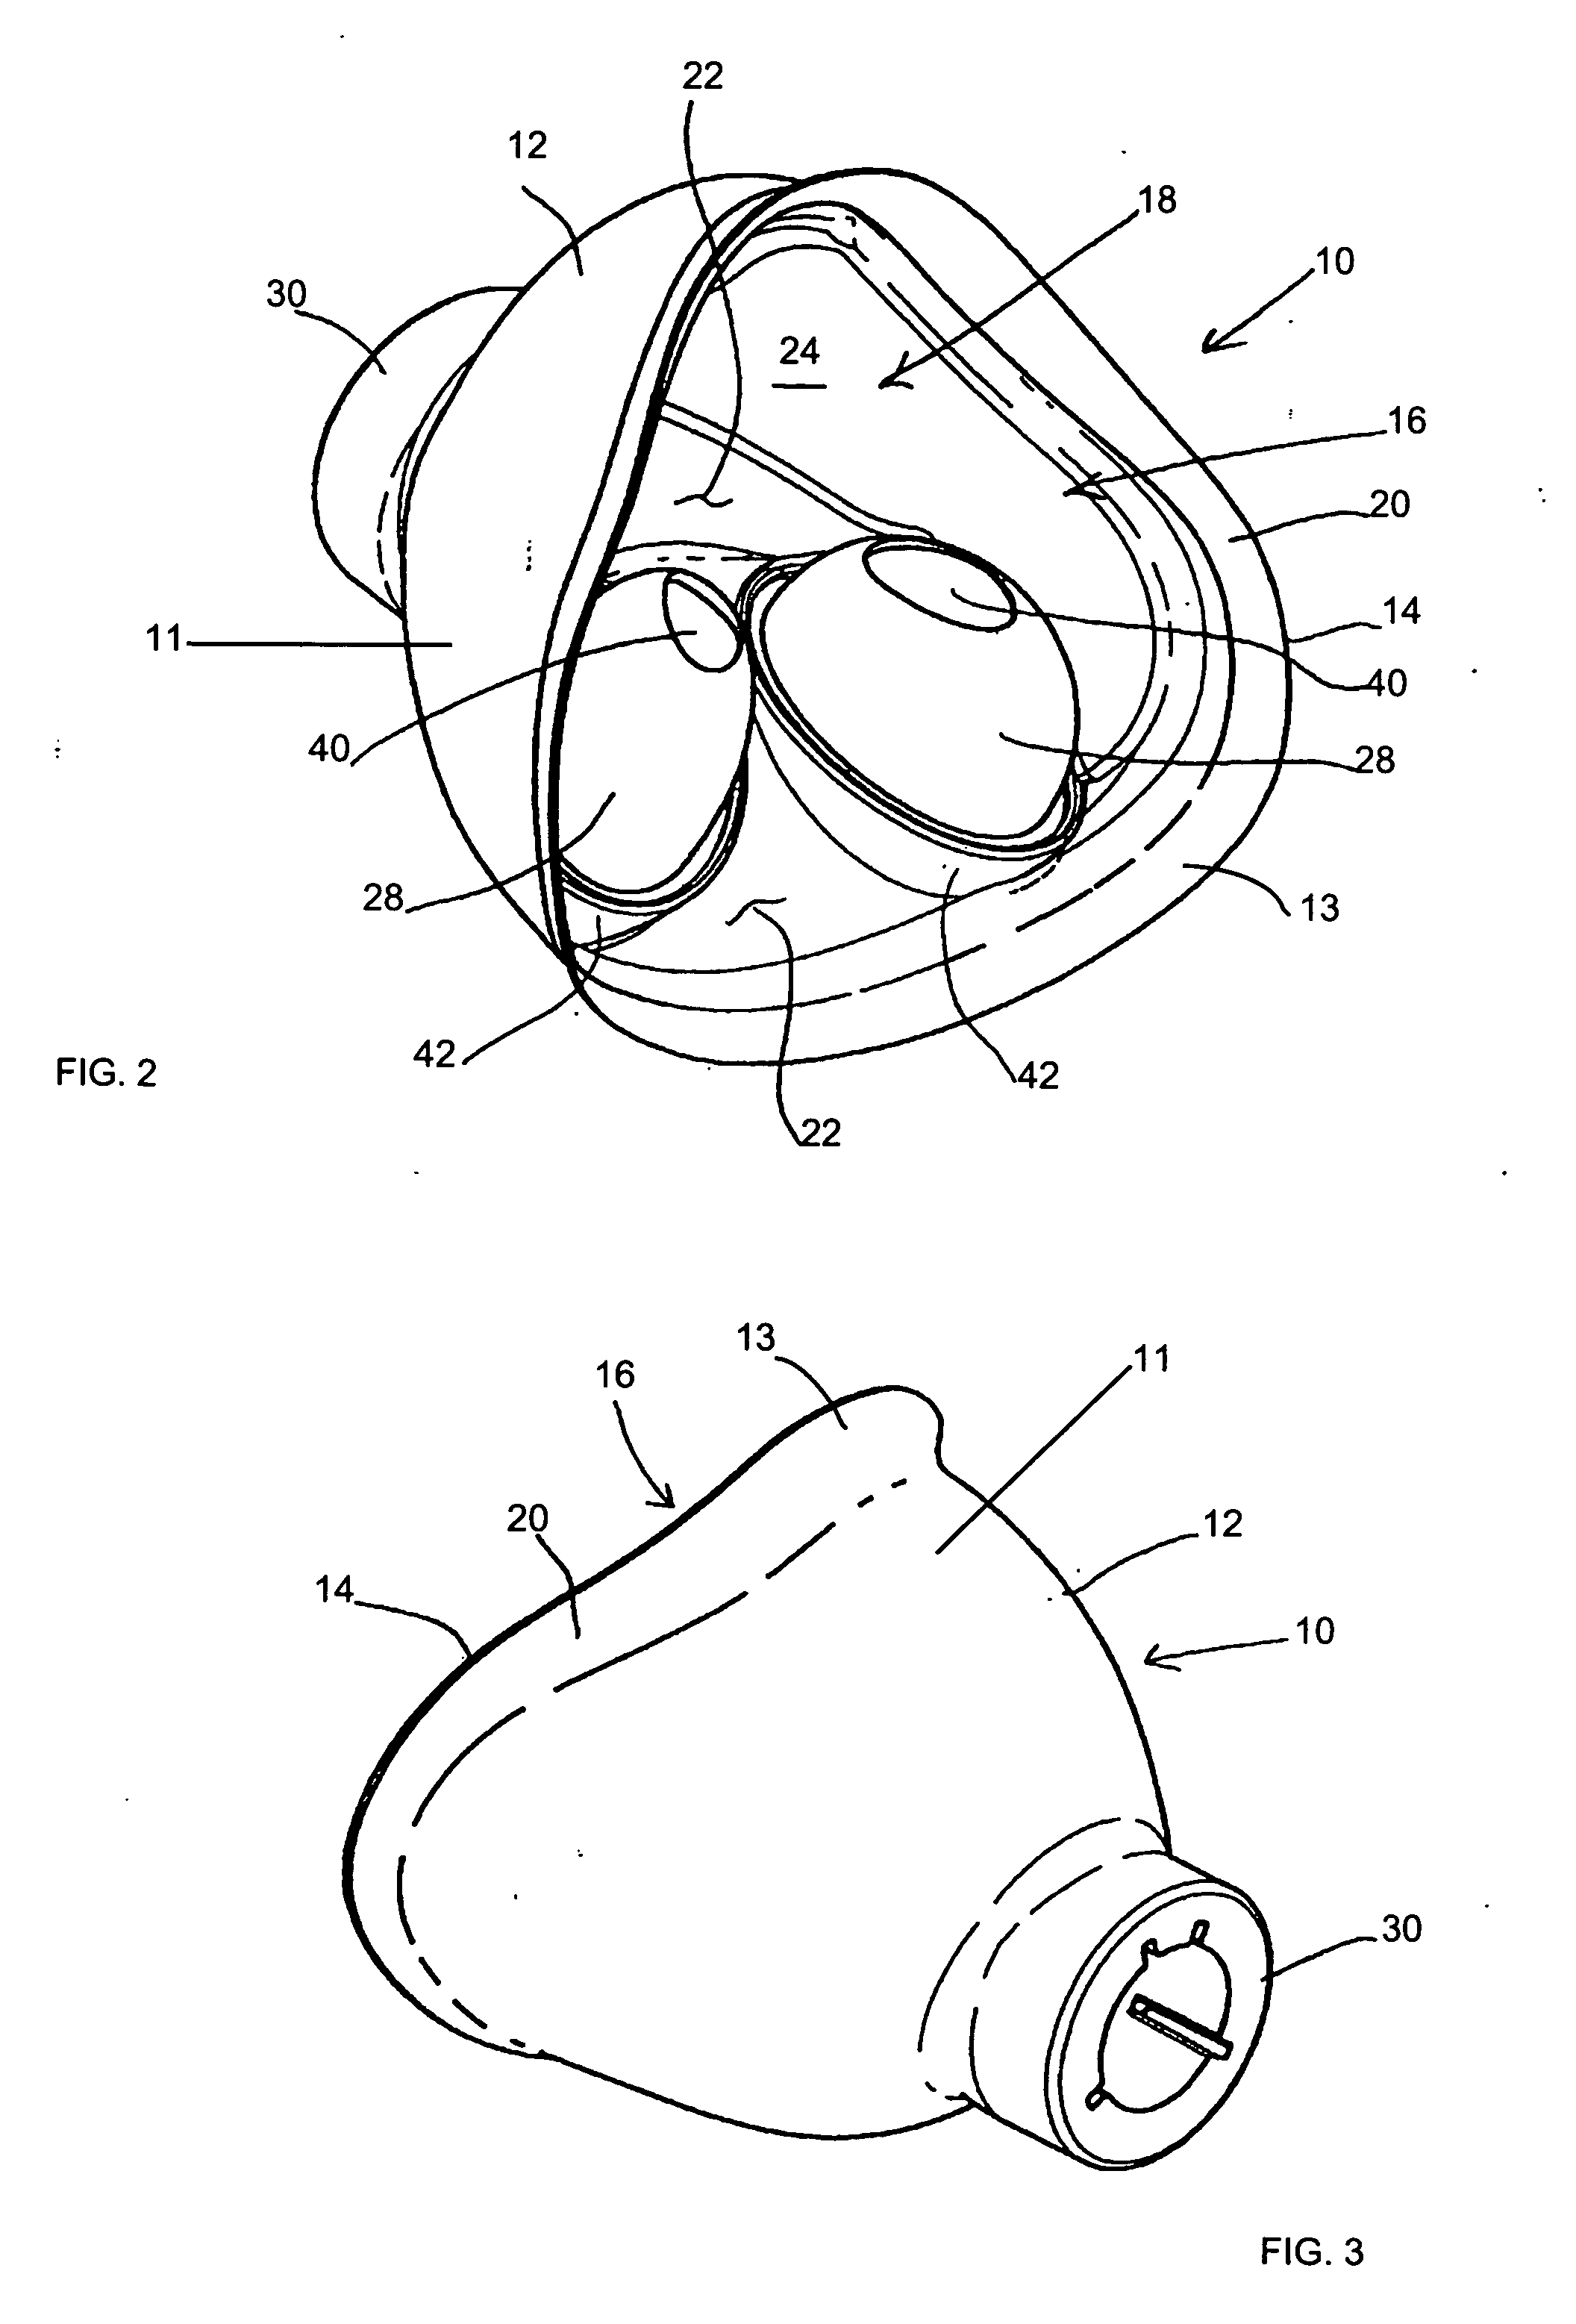 Patient interface with an integral cushion and nasal pillows